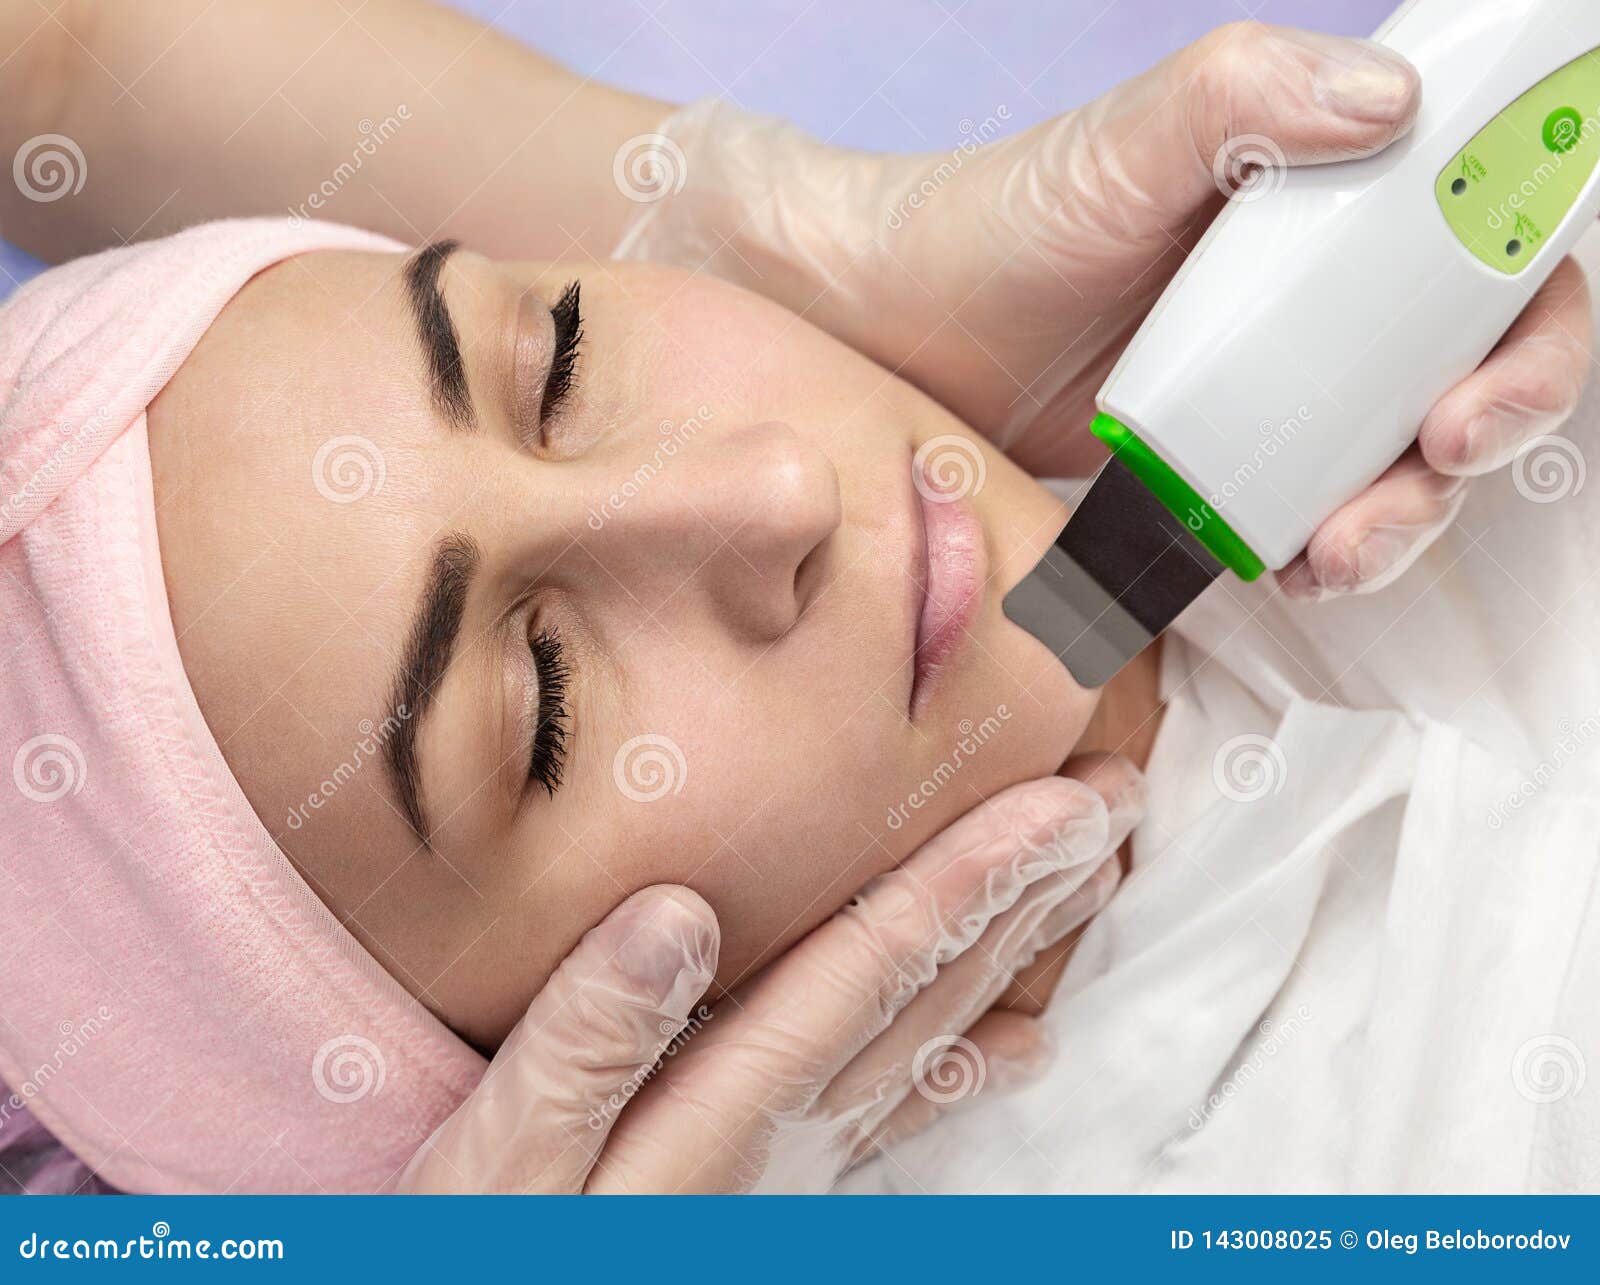 Model And Doctor Rejuvenating Facial Treatment Model Getting Lifting Therapy Massage In A